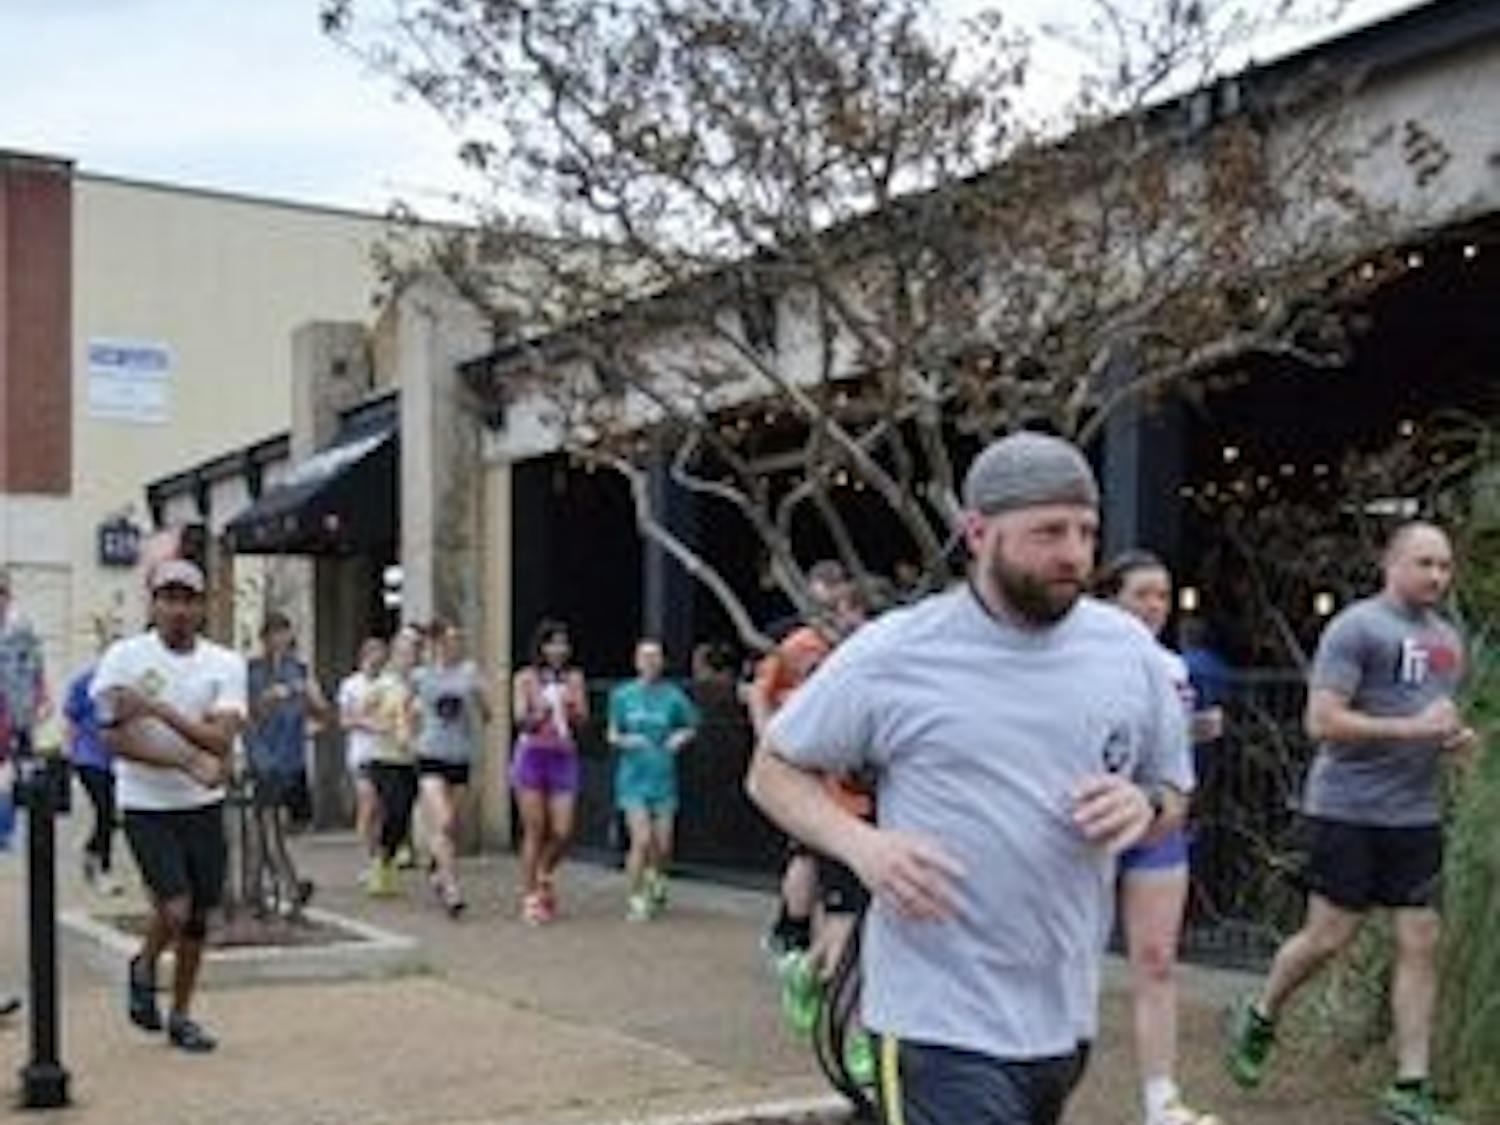 Runners met at Quixote's and celebrated with a couple of beers. (Raye May / PHOTO EDITOR)